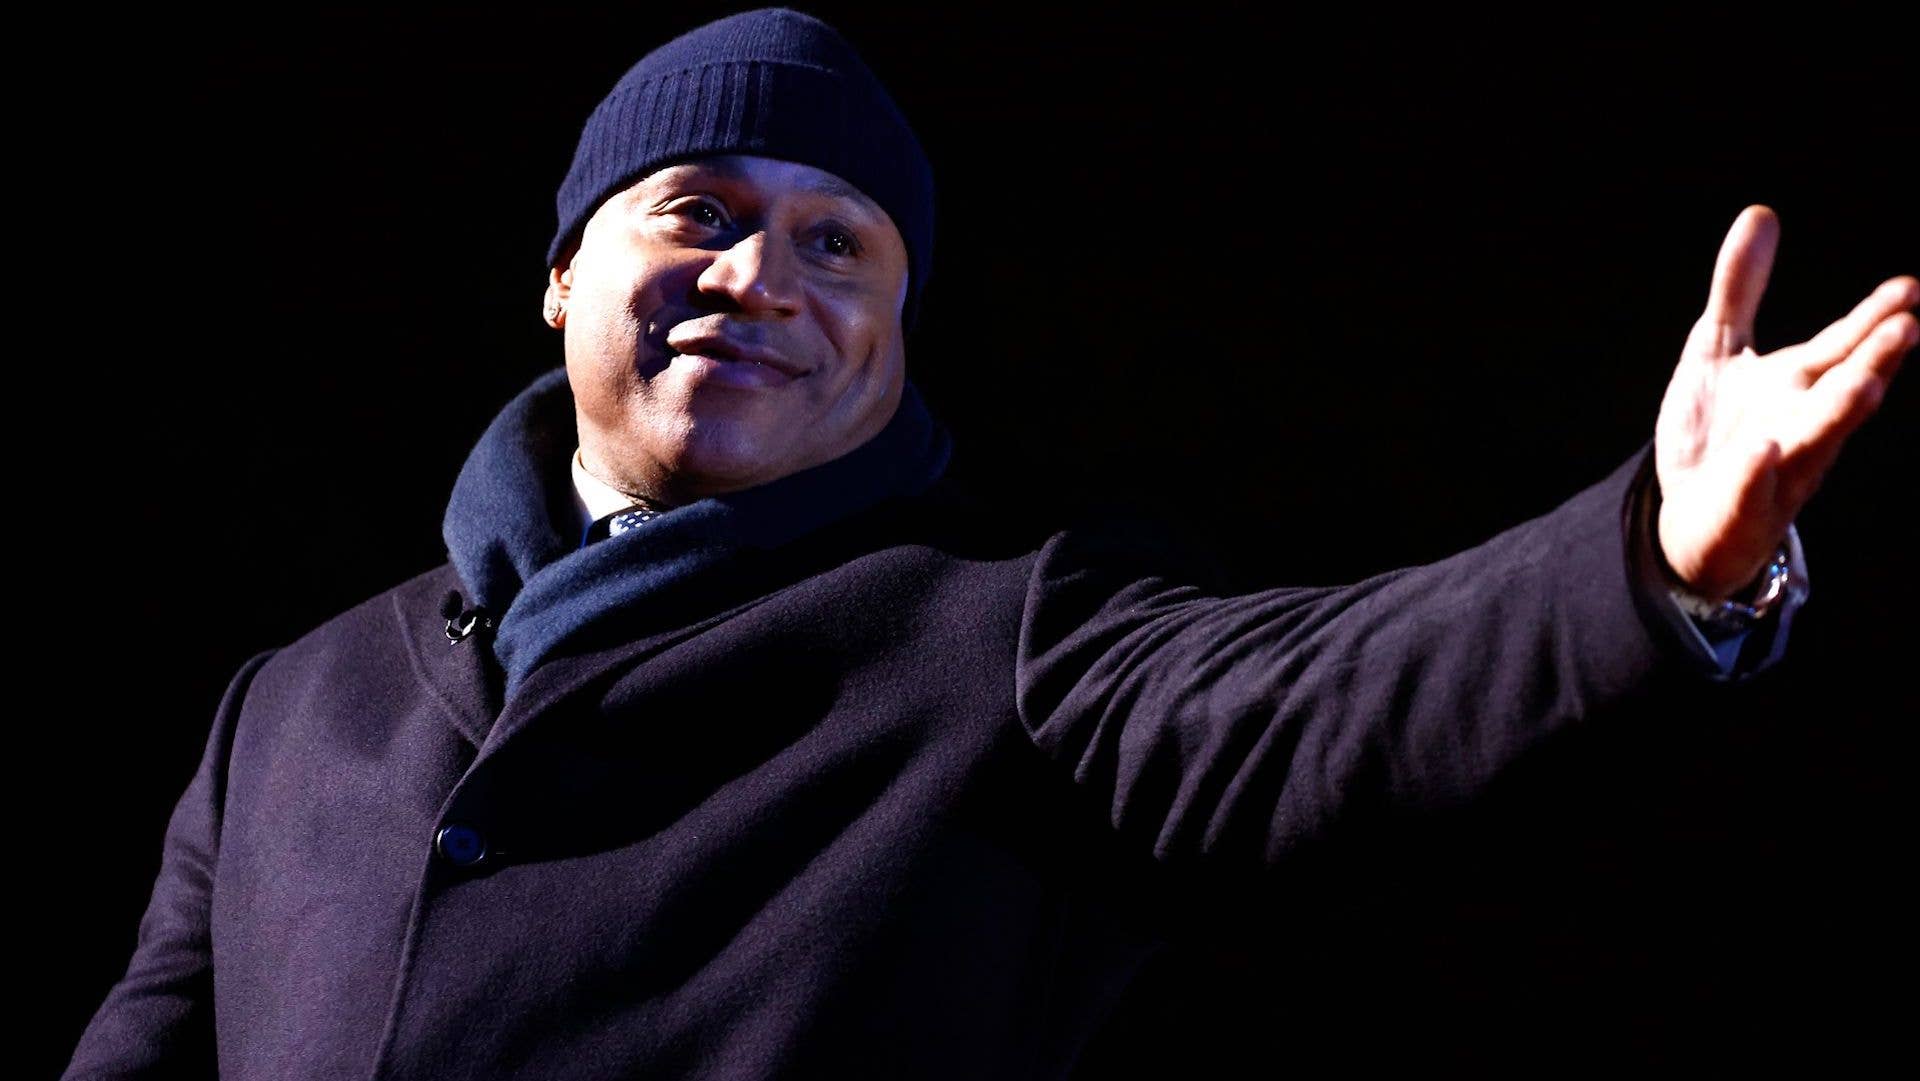 LL Cool J onstage at the 99th National Christmas Tree Lighting Ceremony in President's Park near The White House